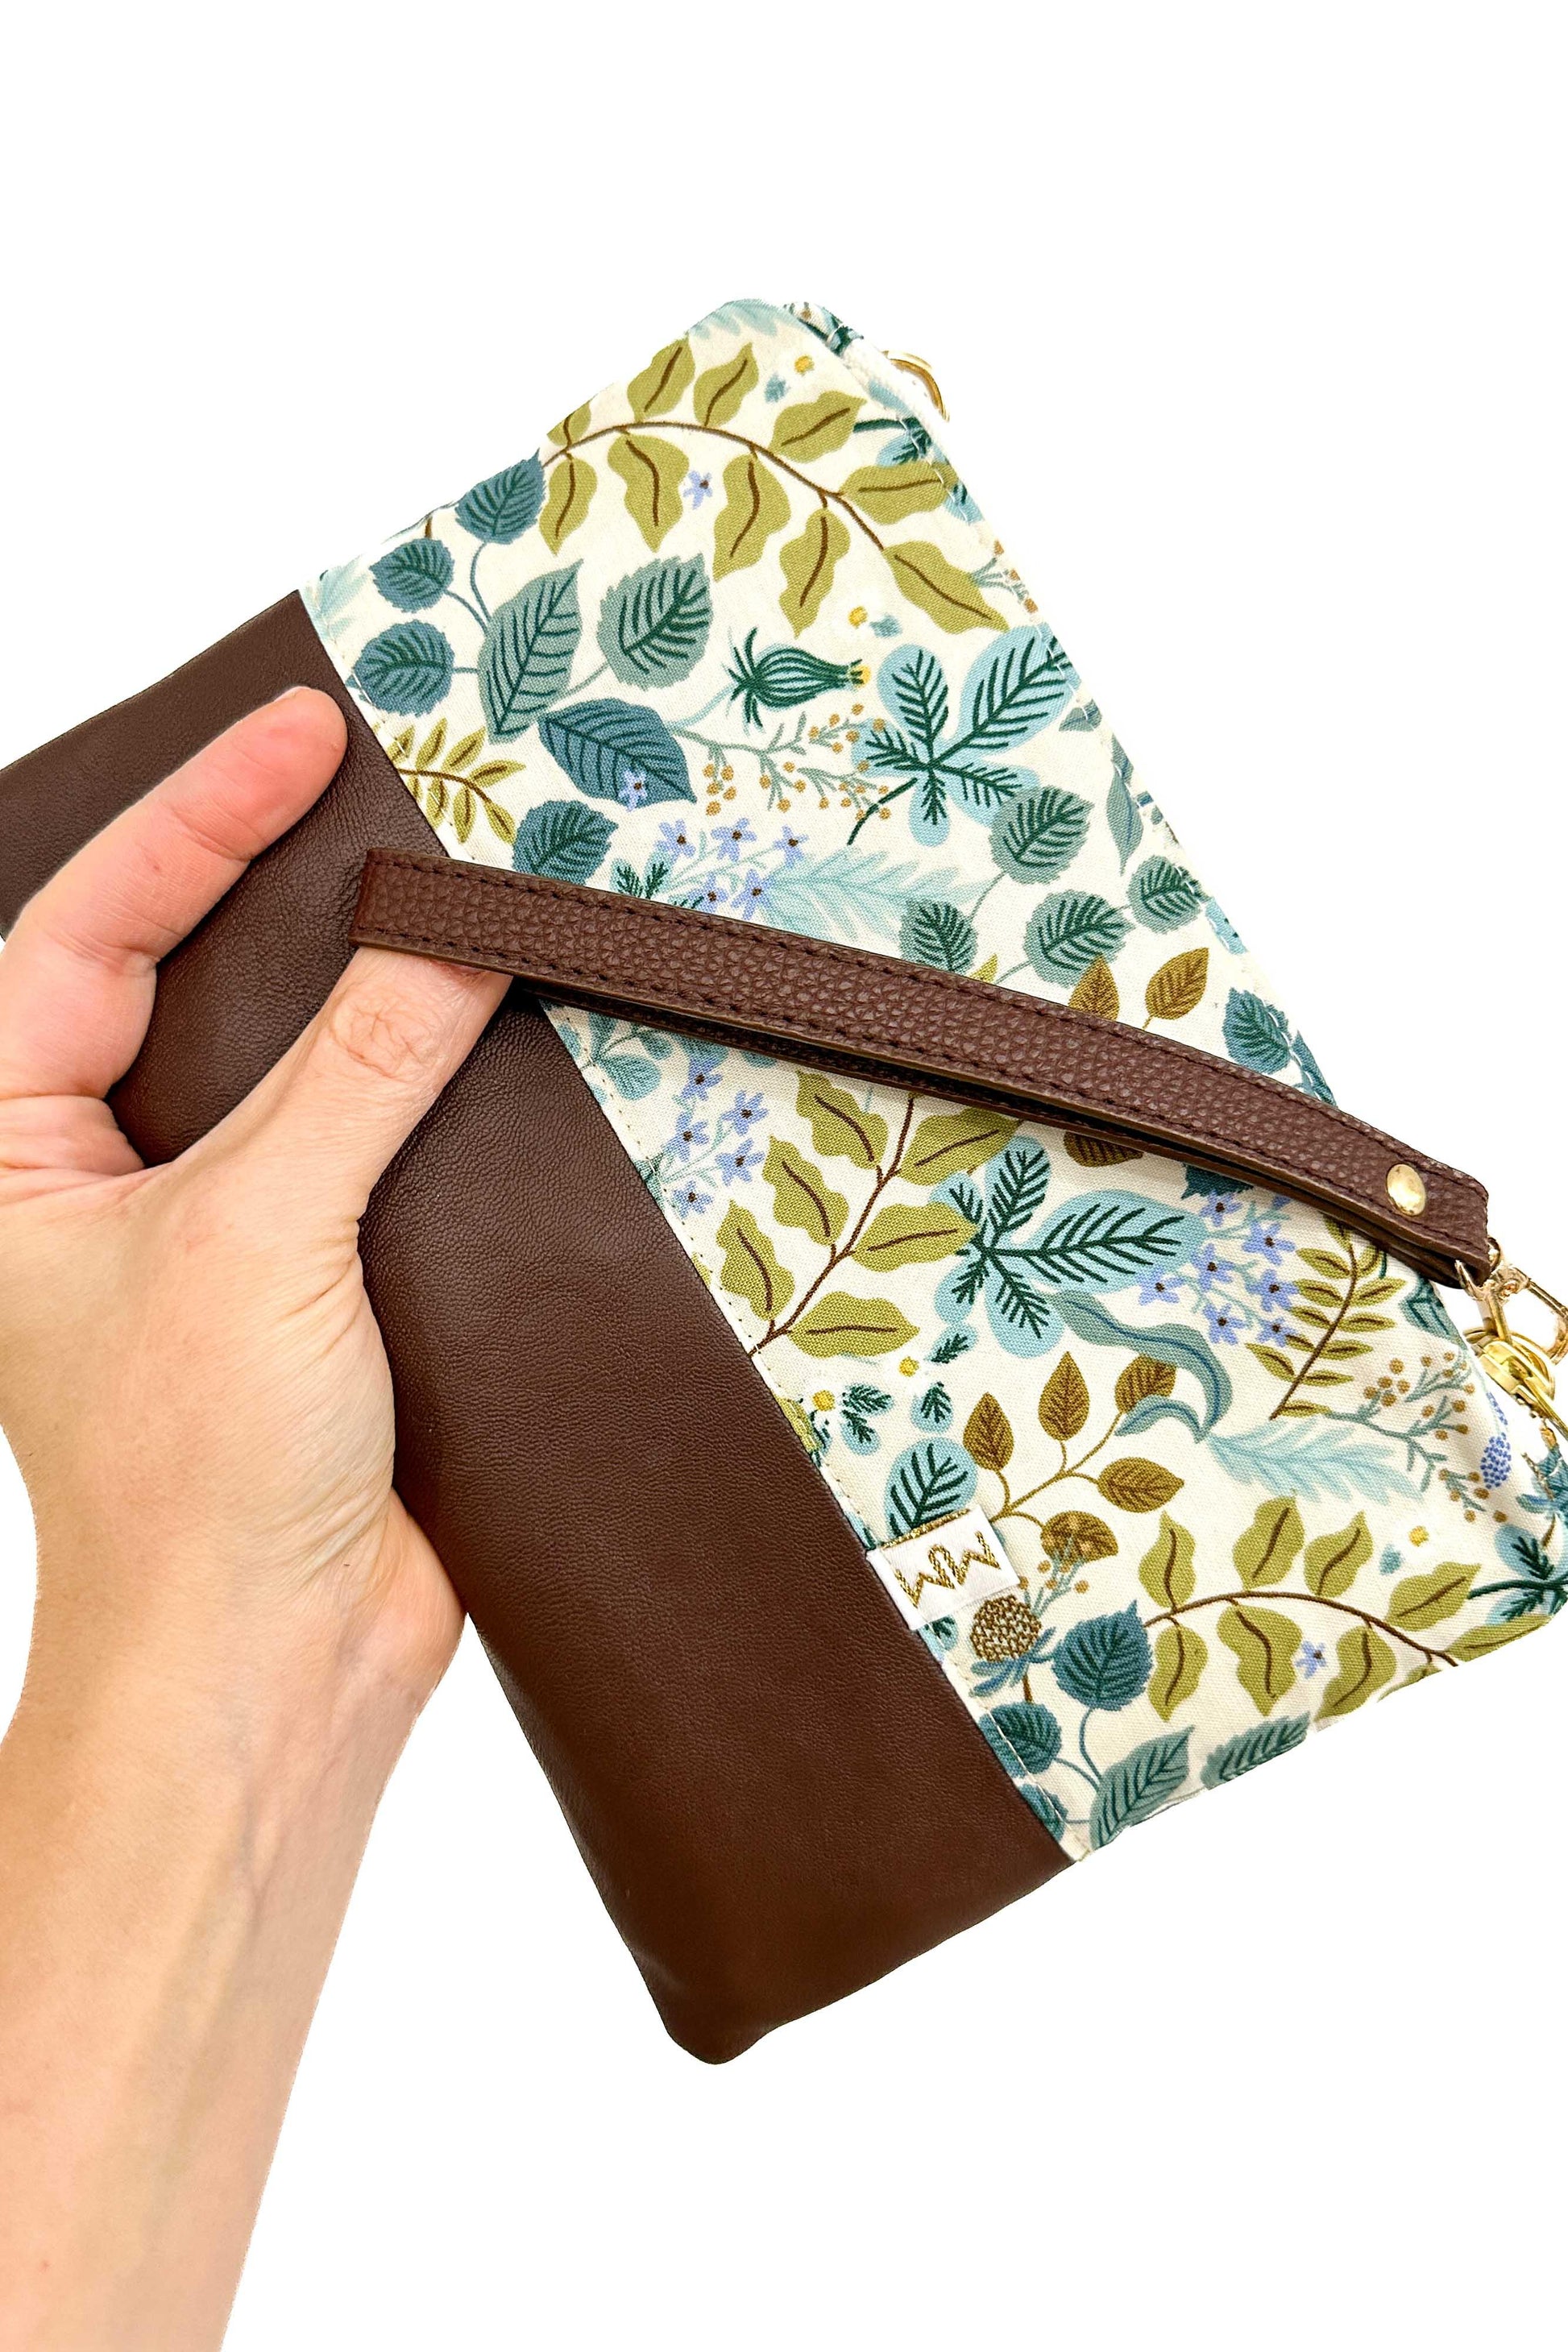 Sage Garden Convertible Crossbody Wristlet+ with Compartments READY TO SHIP - Modern Makerie